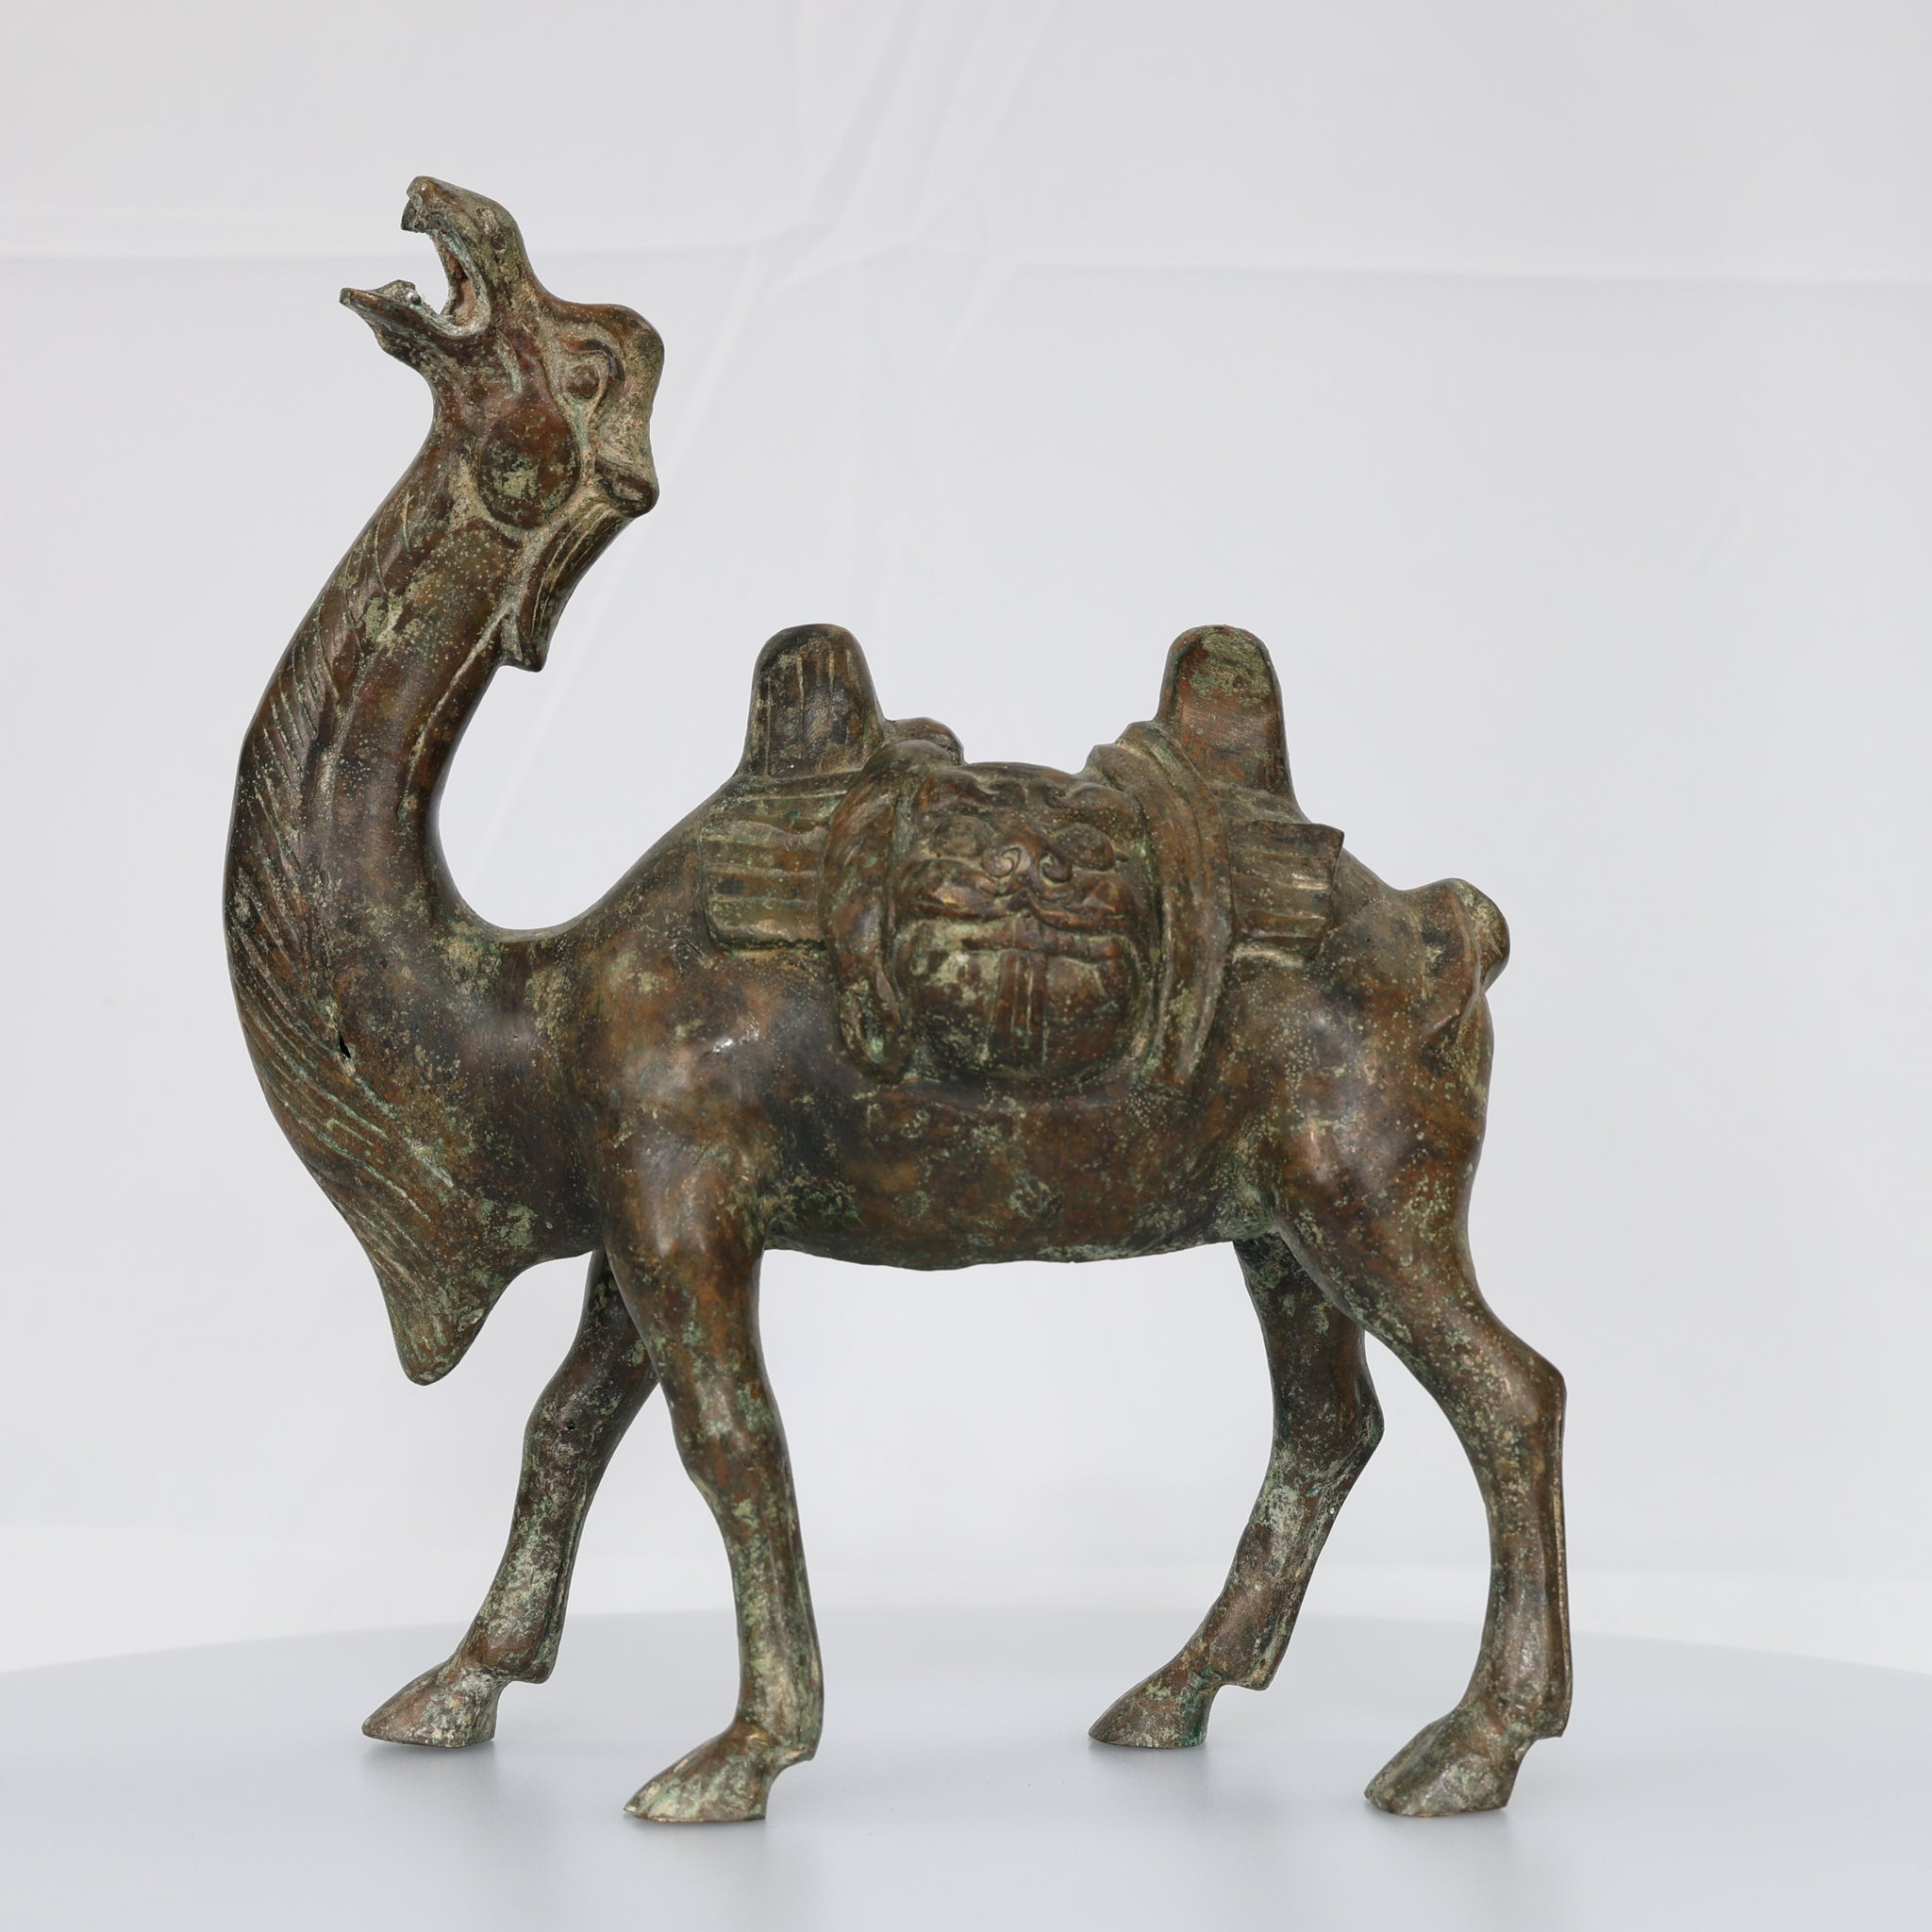 Antique Old Chinese Bronze Ware Dynasty Animal two-humped camel llama Statue